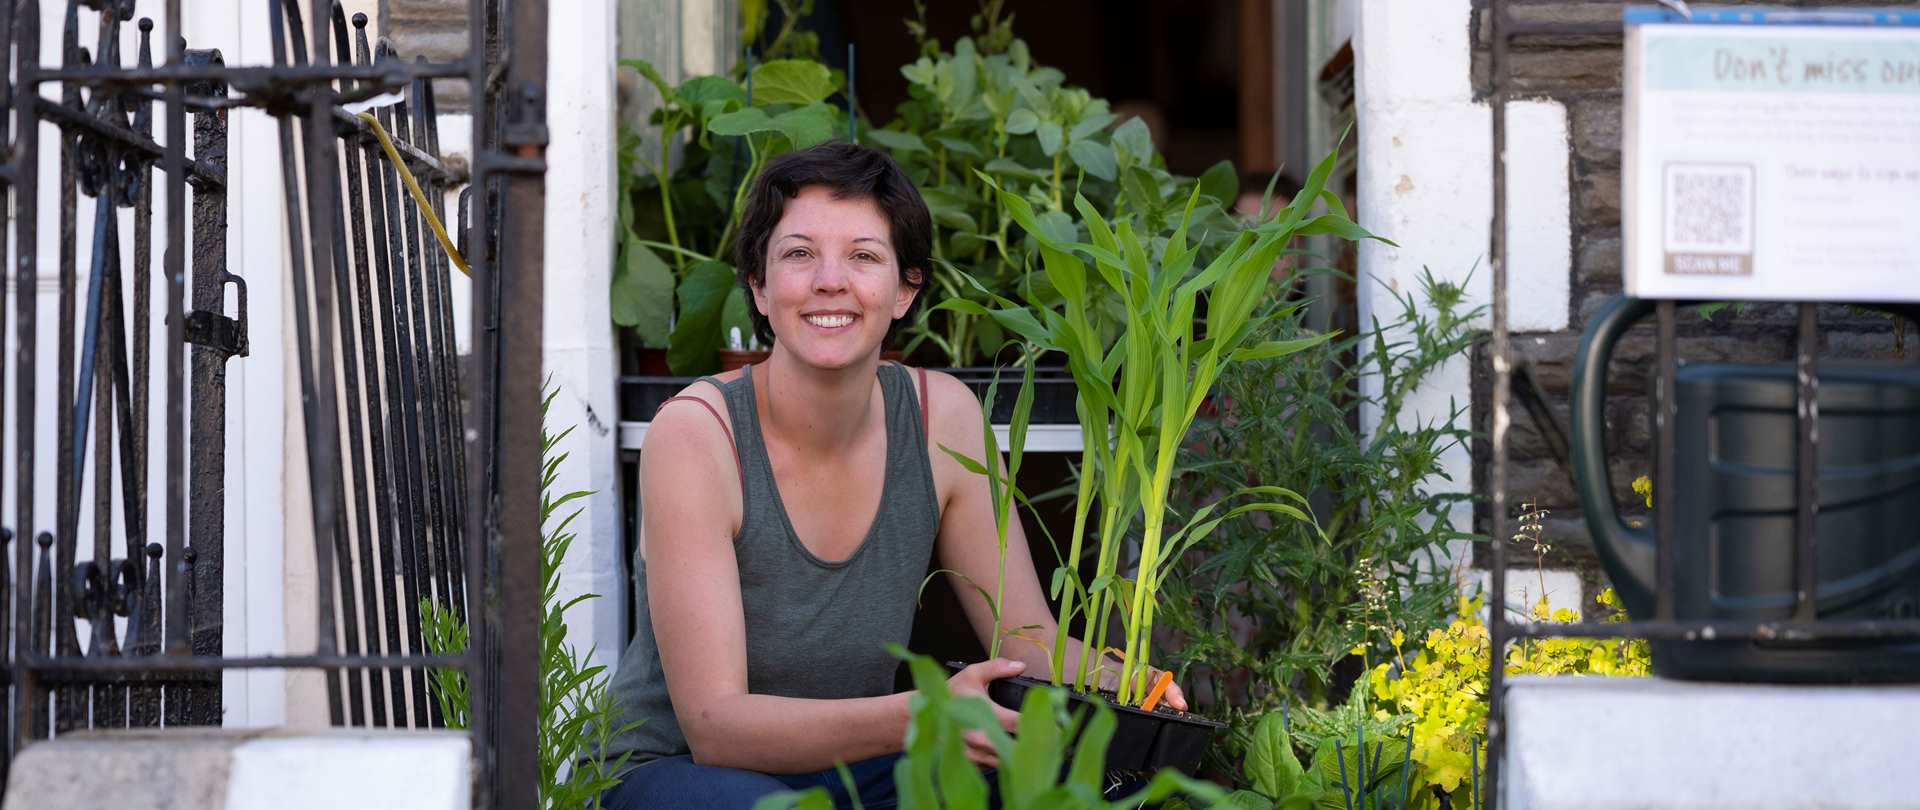 A smiling woman crouching down among plants in pots